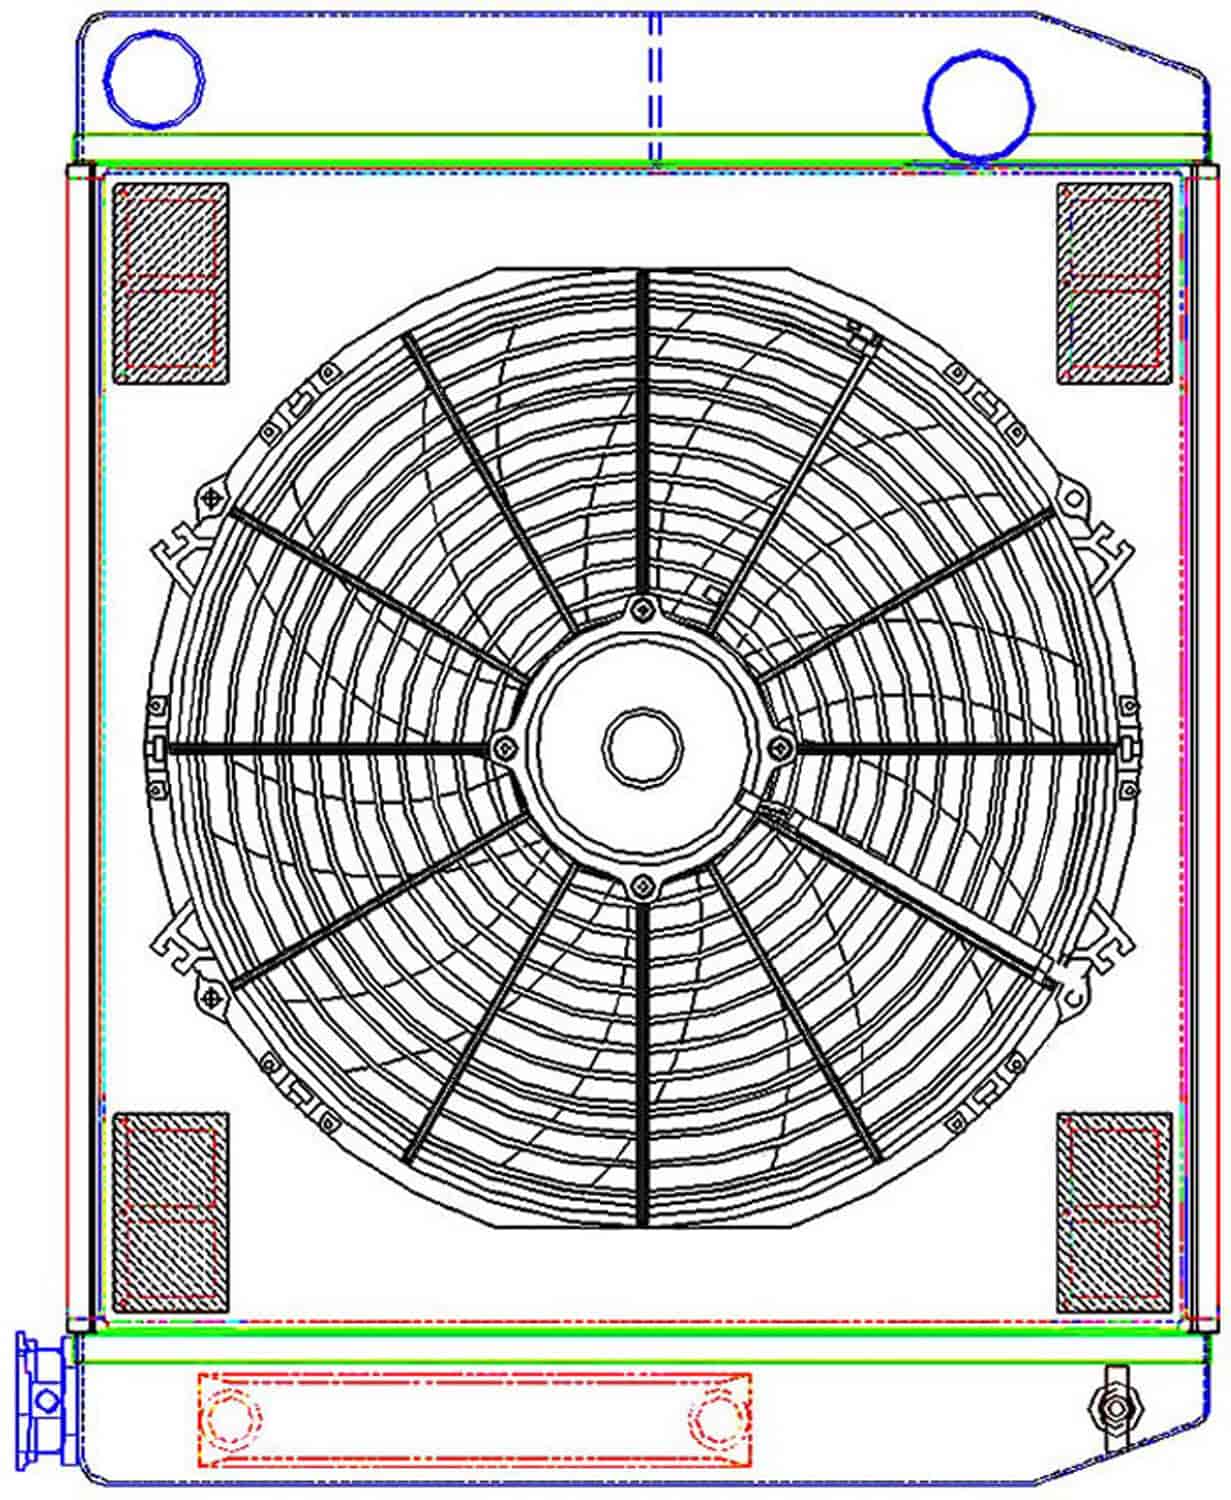 MegaCool ComboUnit Universal Fit Radiator and Fan Dual Pass Crossflow Design 24" x 19" with Transmission Cooler